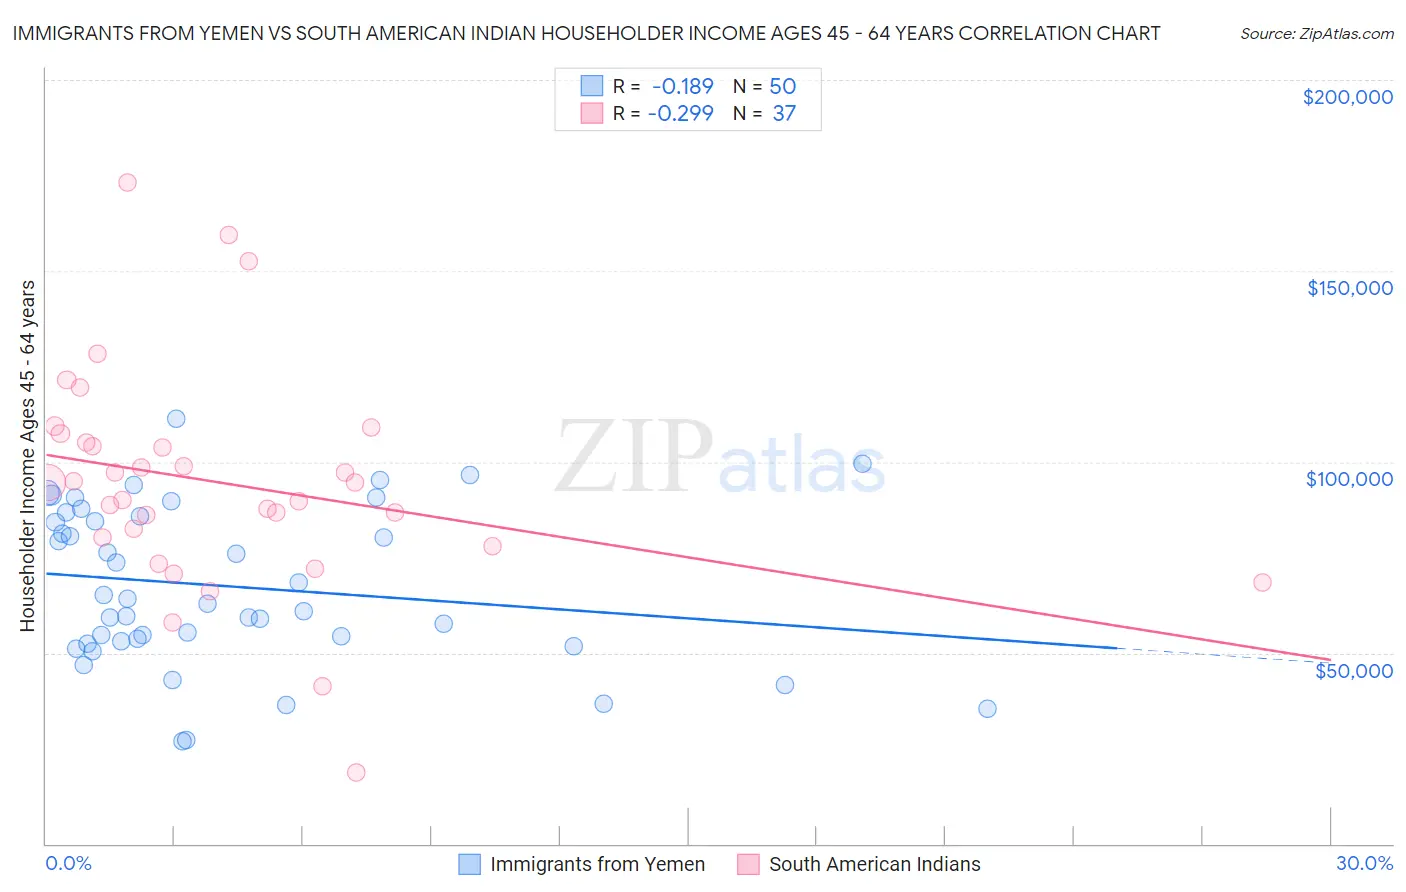 Immigrants from Yemen vs South American Indian Householder Income Ages 45 - 64 years